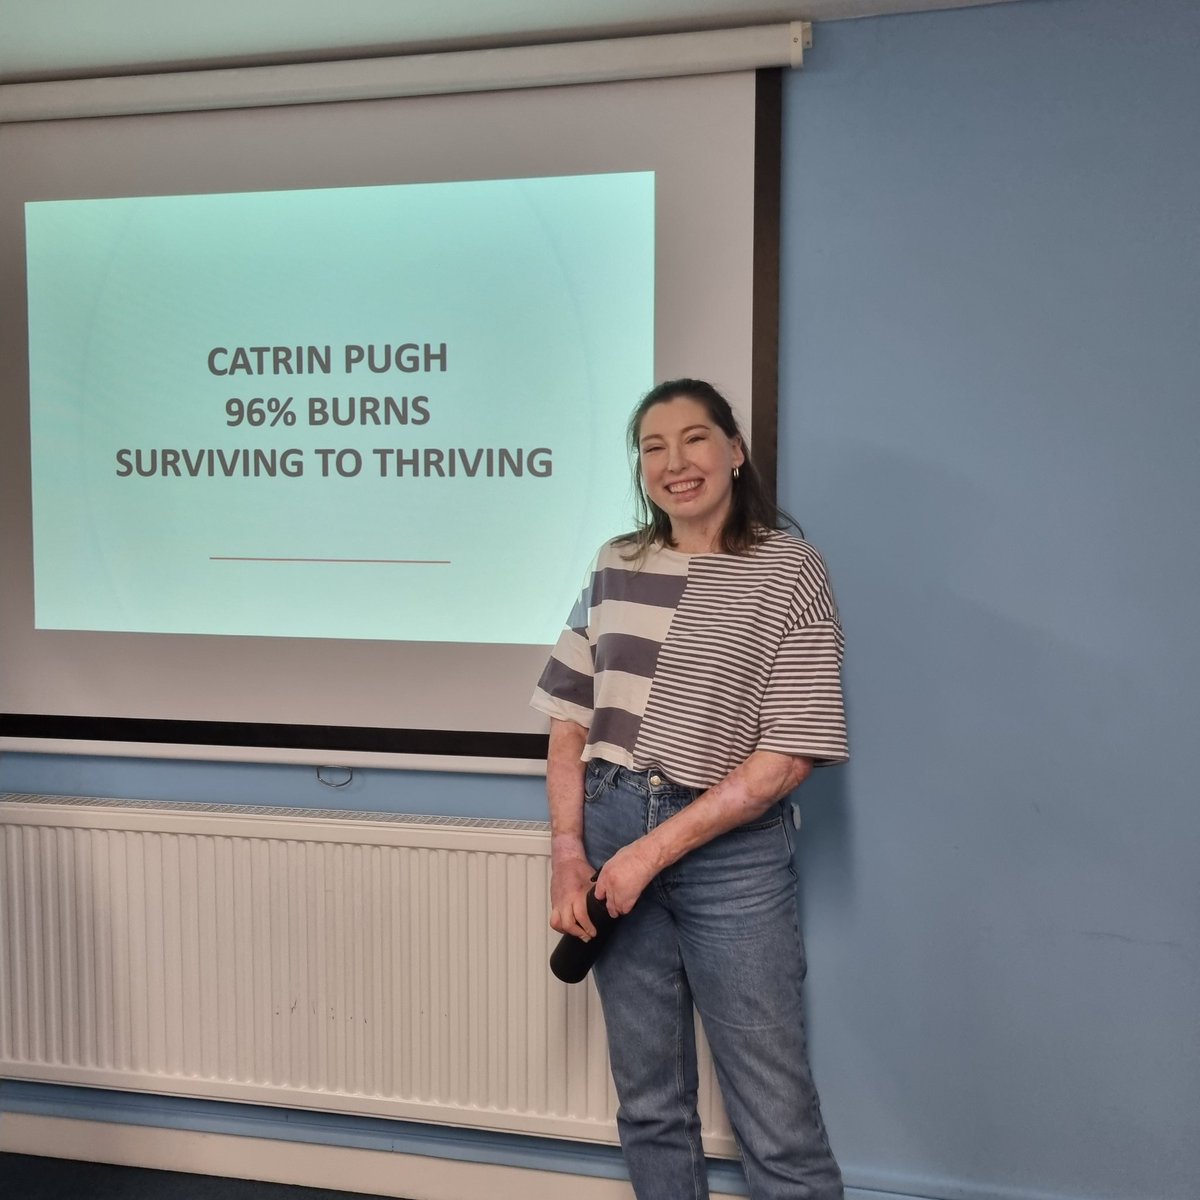 Day 1 of our highly evaluated Burncare course has included sessions on wound healing and dressings, also an inspirational presentation from burns survivor @CatrinPugh